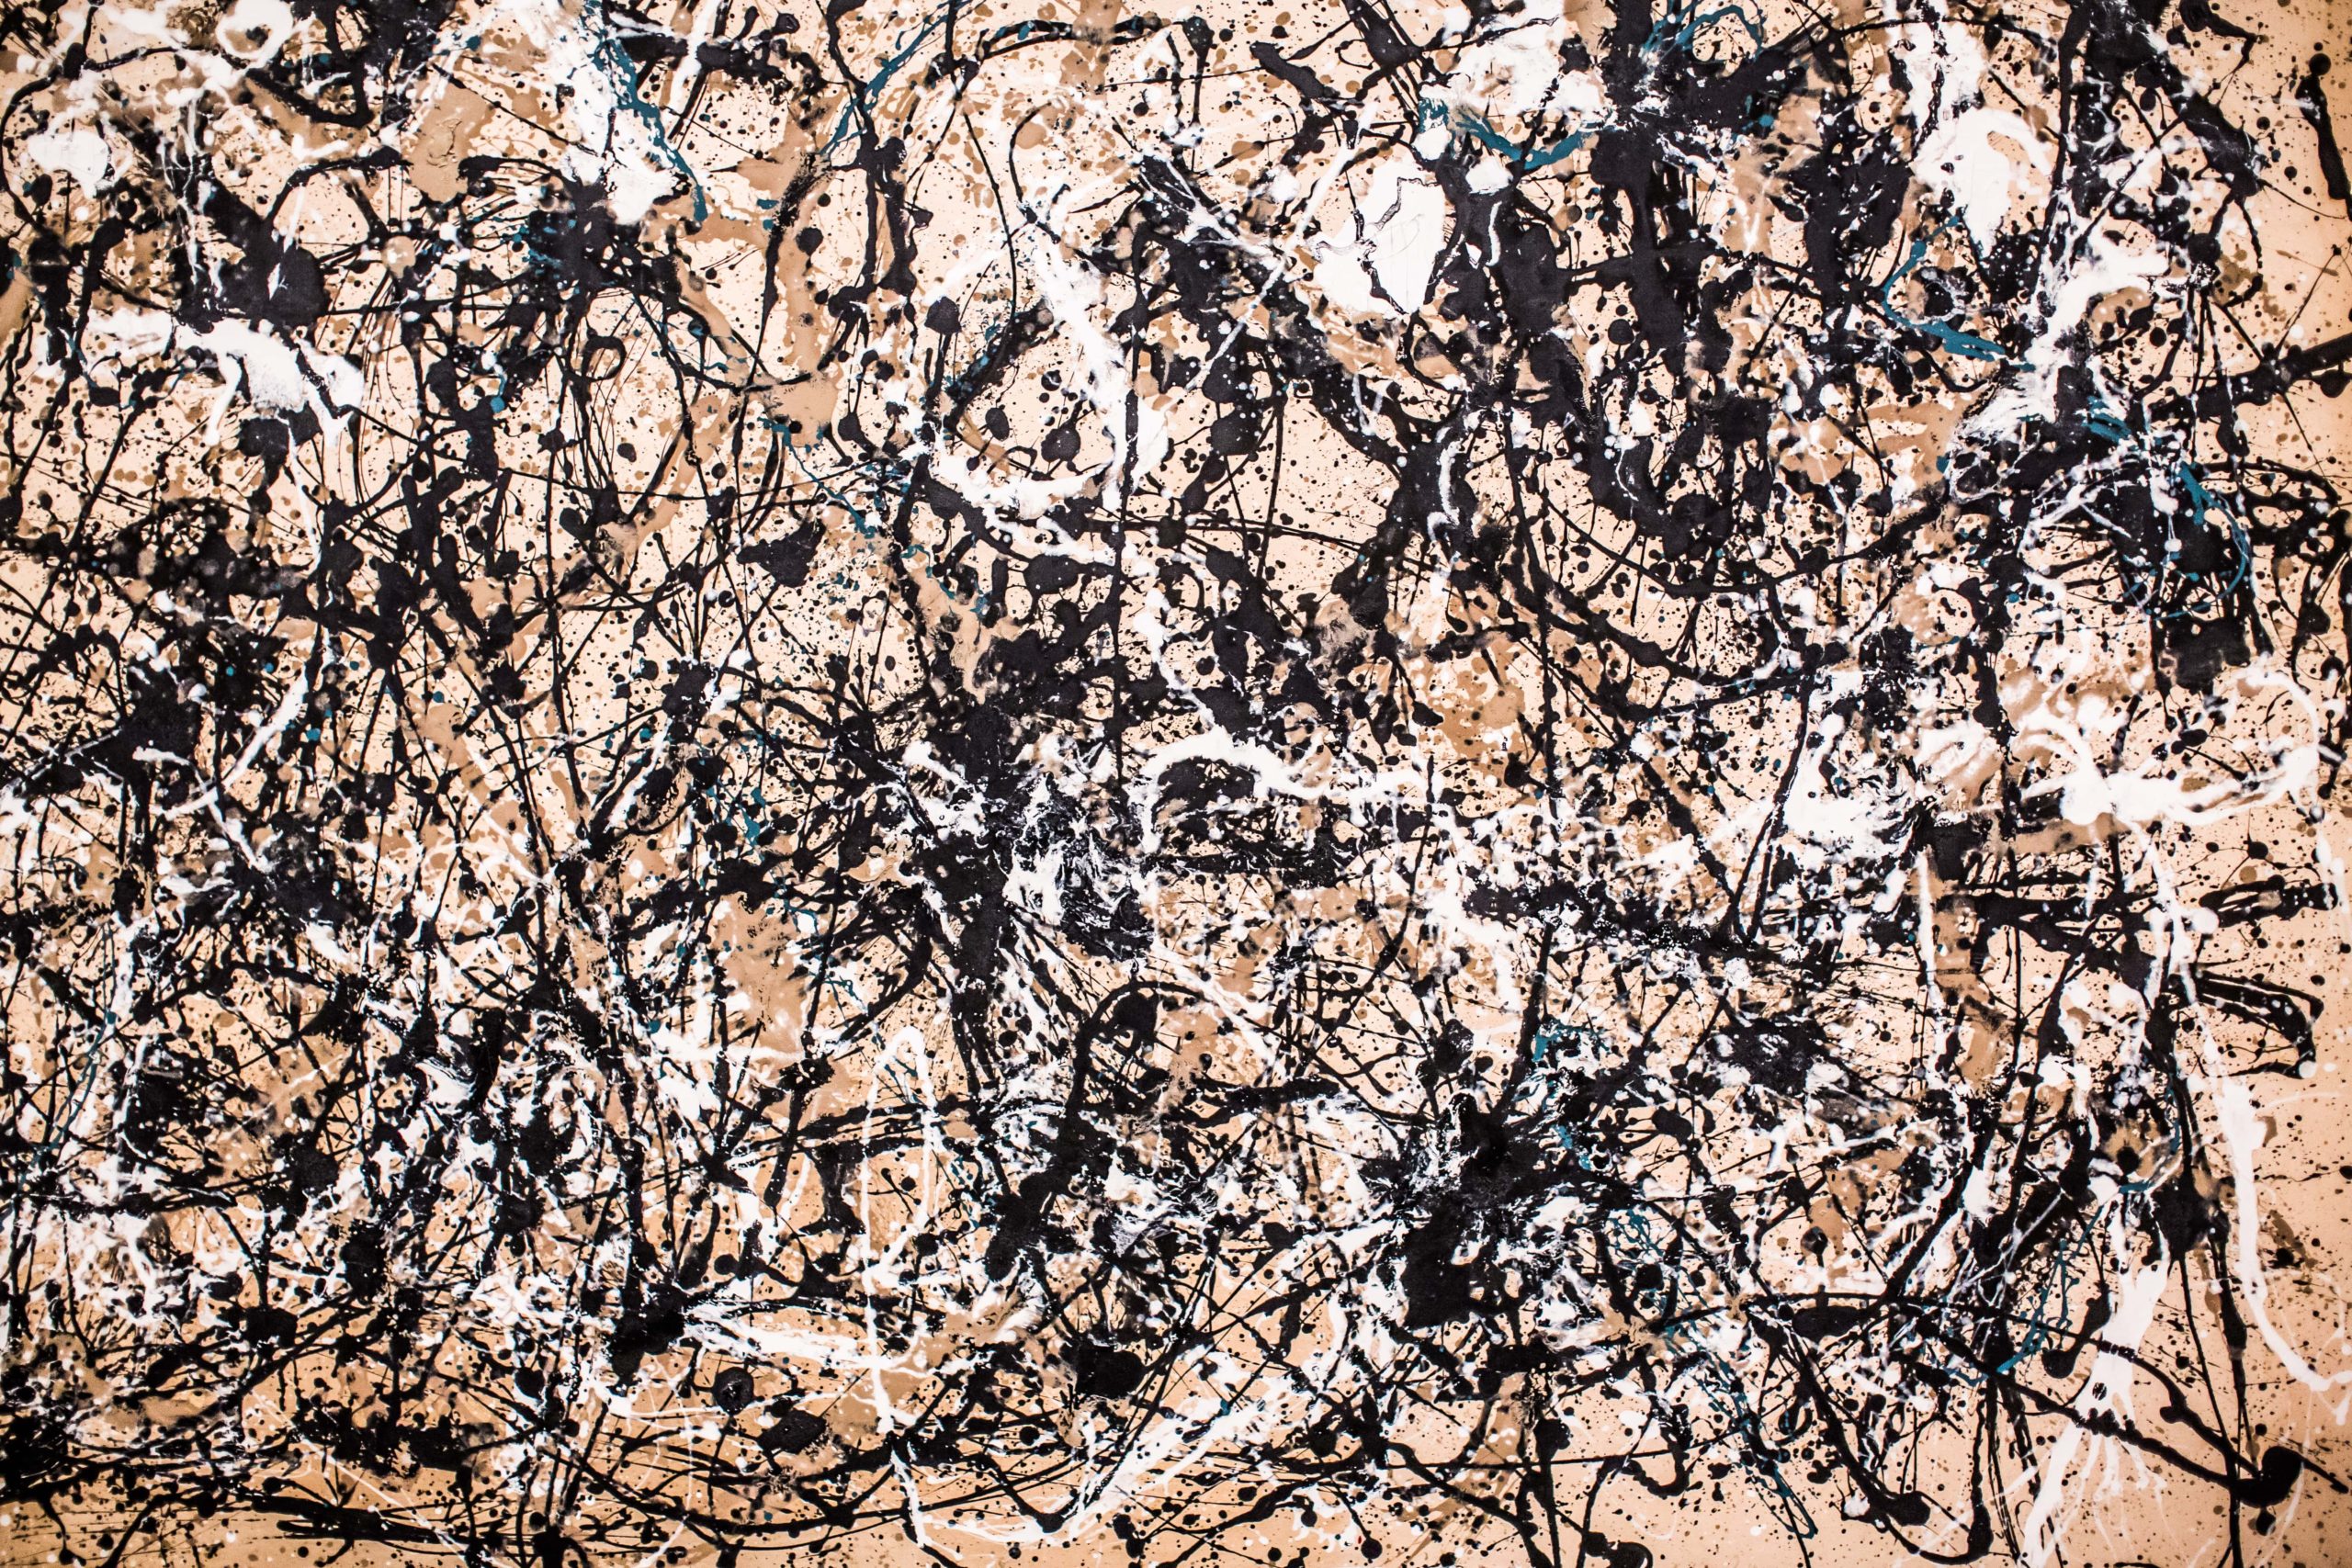 Detail of Jackson Pollock - Autumn Rhythm (Number 30), 1950, enamel on canvas, 266.7 x 525.8 cm (8 ft. 9 in. x 17 ft. 3 in.), installation view, Metropolitan Museum of Art, New York